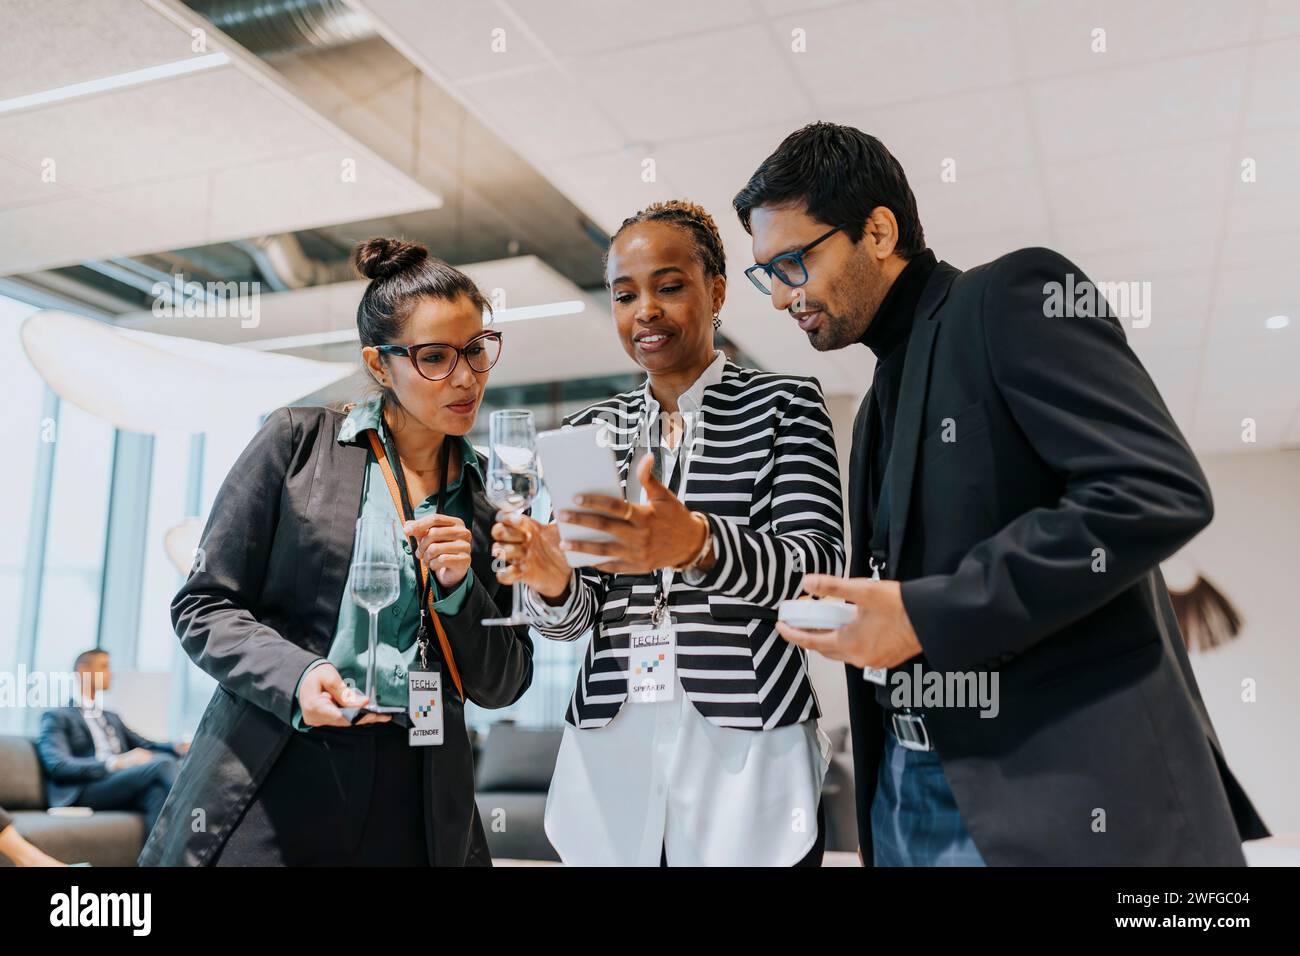 Businesswoman sharing smart phone with delegates during networking seminar Stock Photo